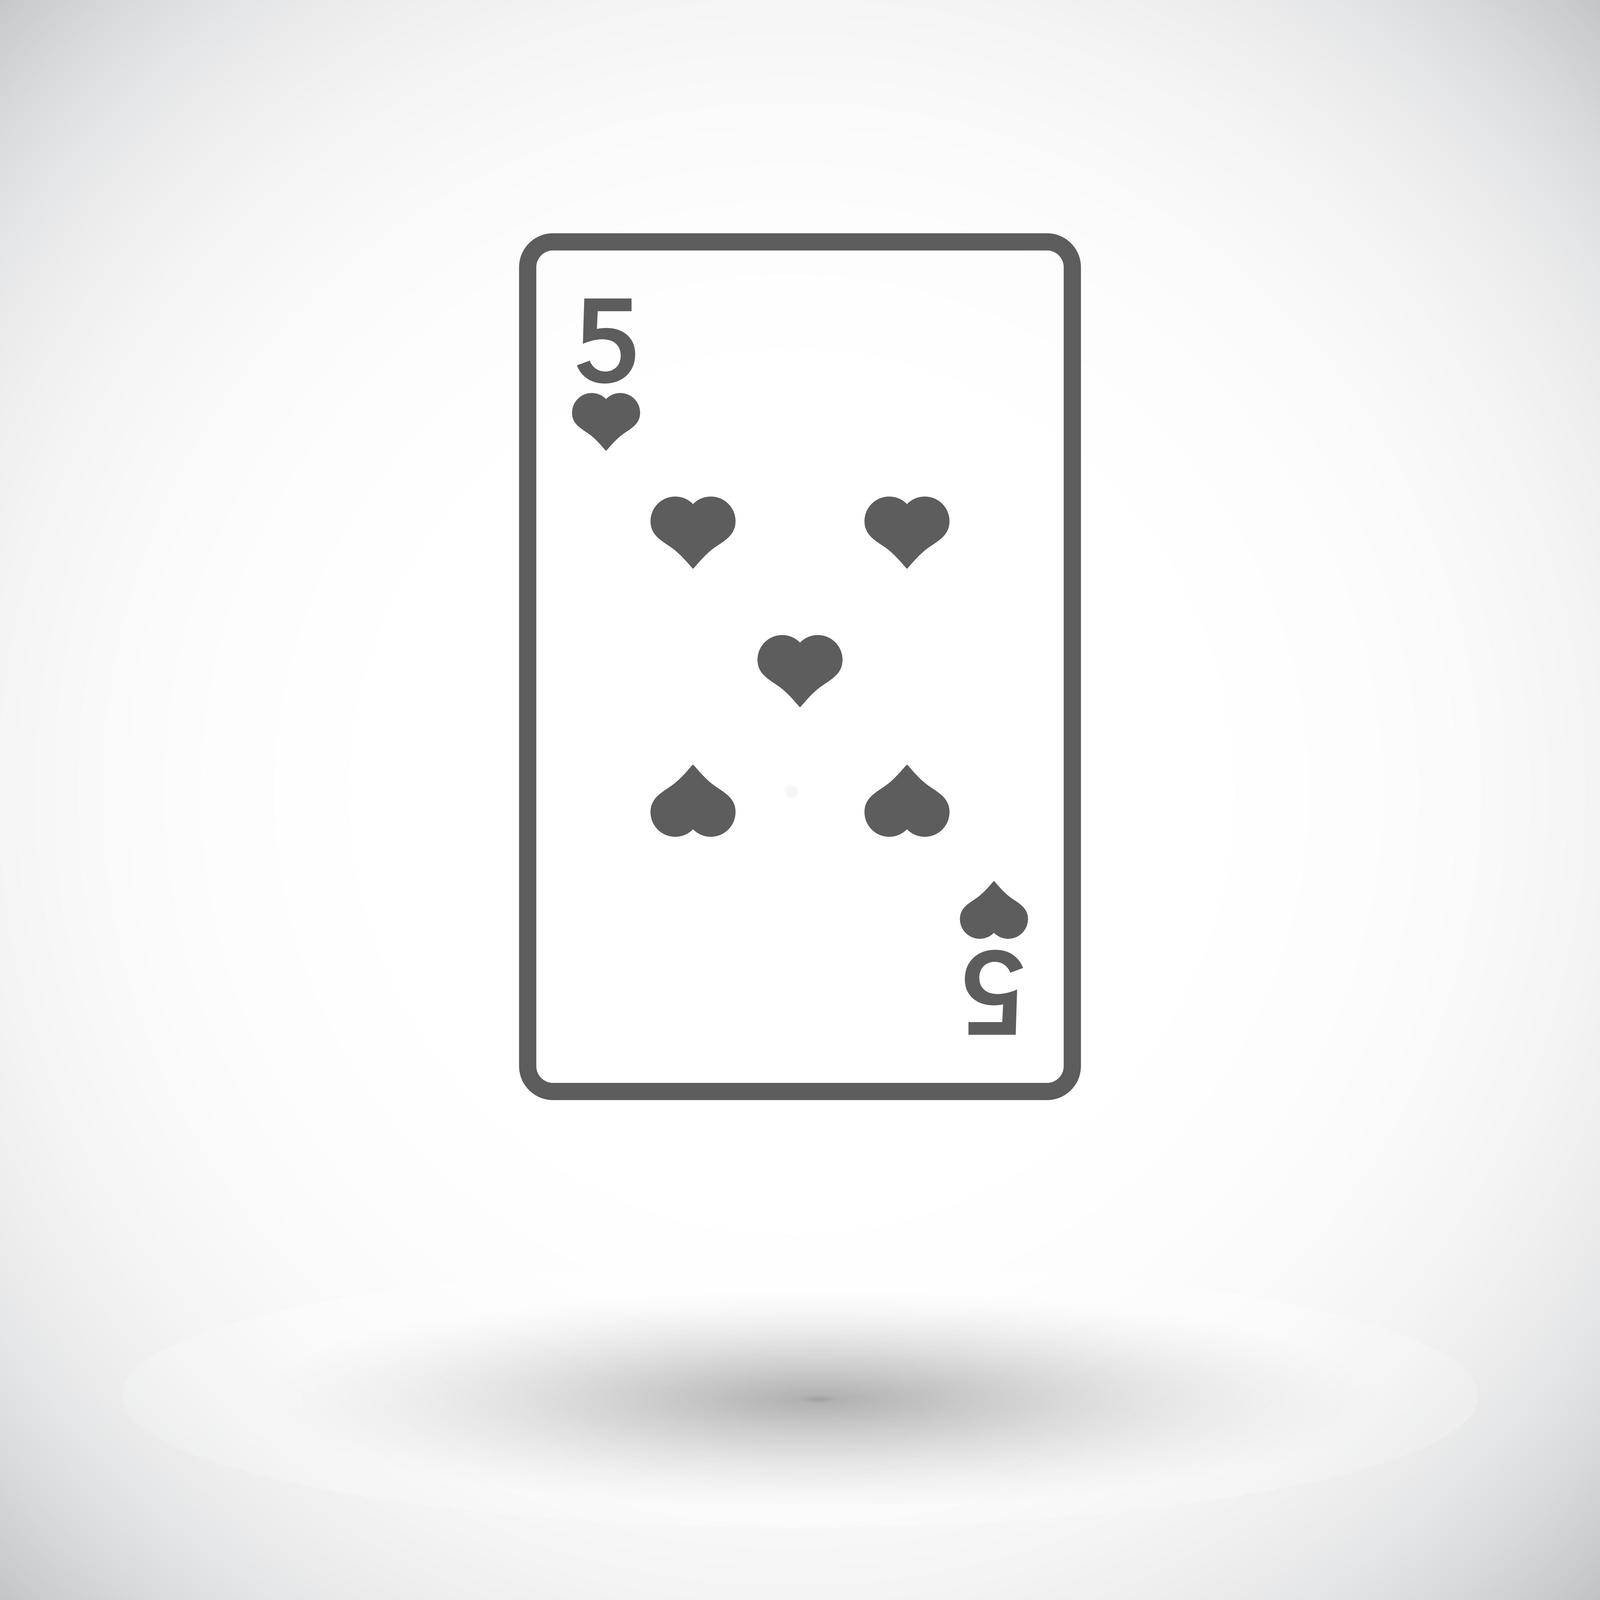 Play card. Single flat icon on white background. Vector illustration.